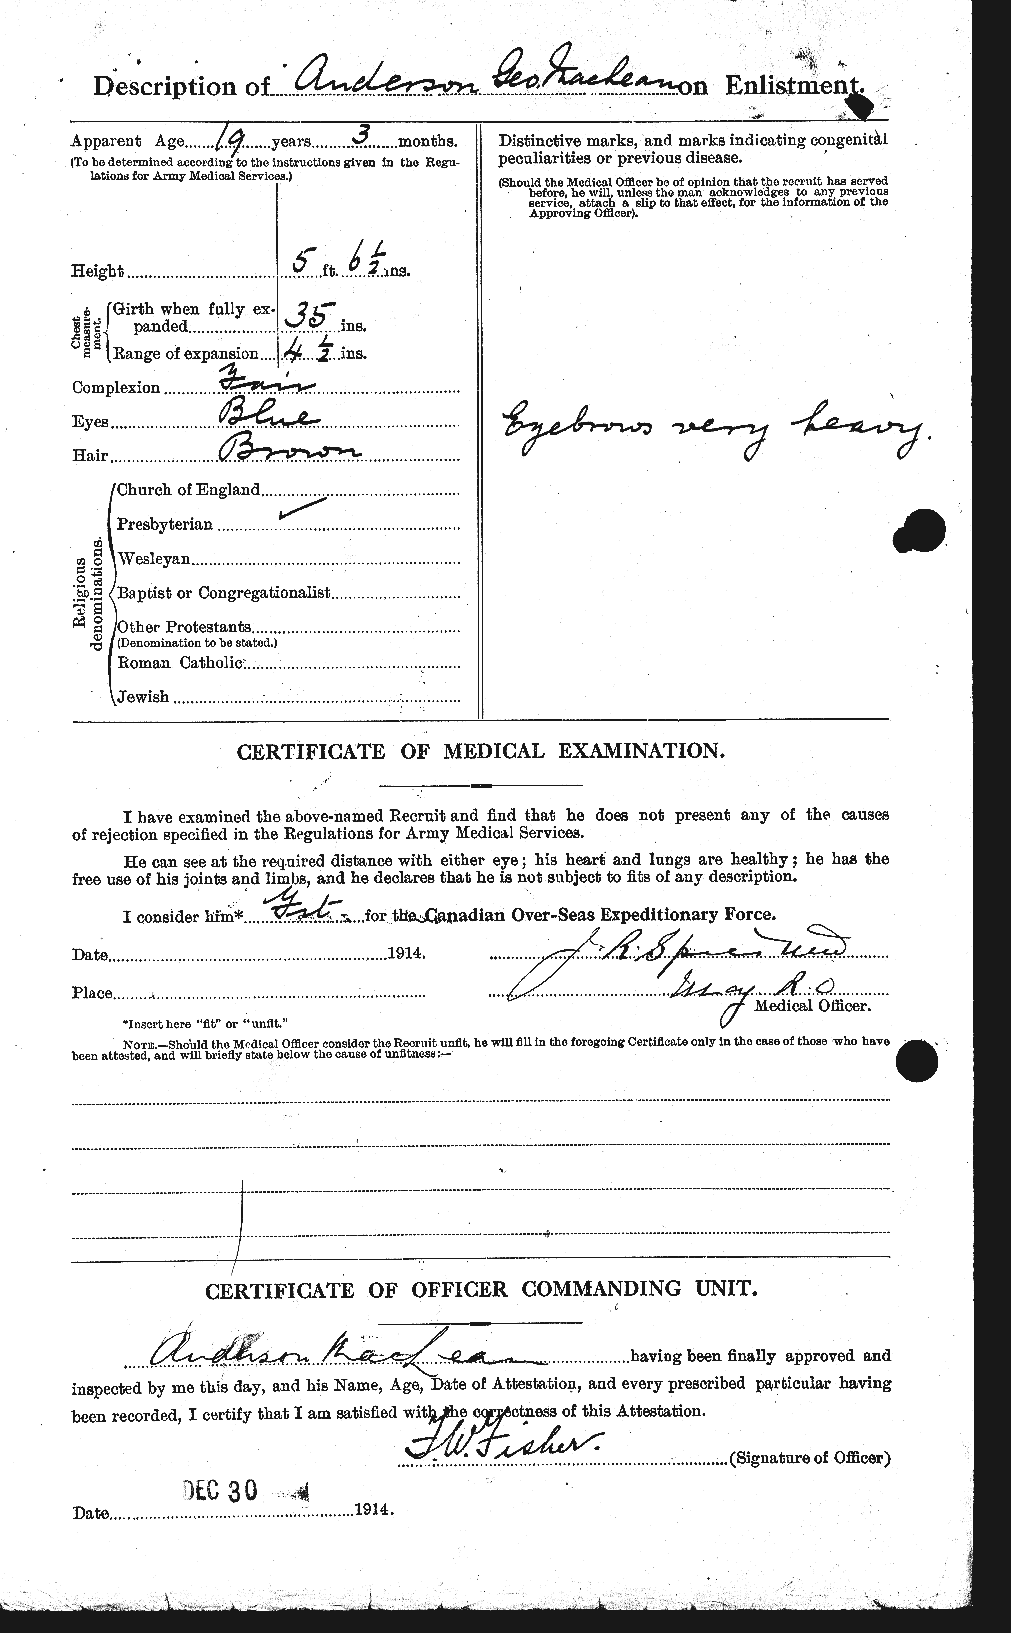 Personnel Records of the First World War - CEF 209710b